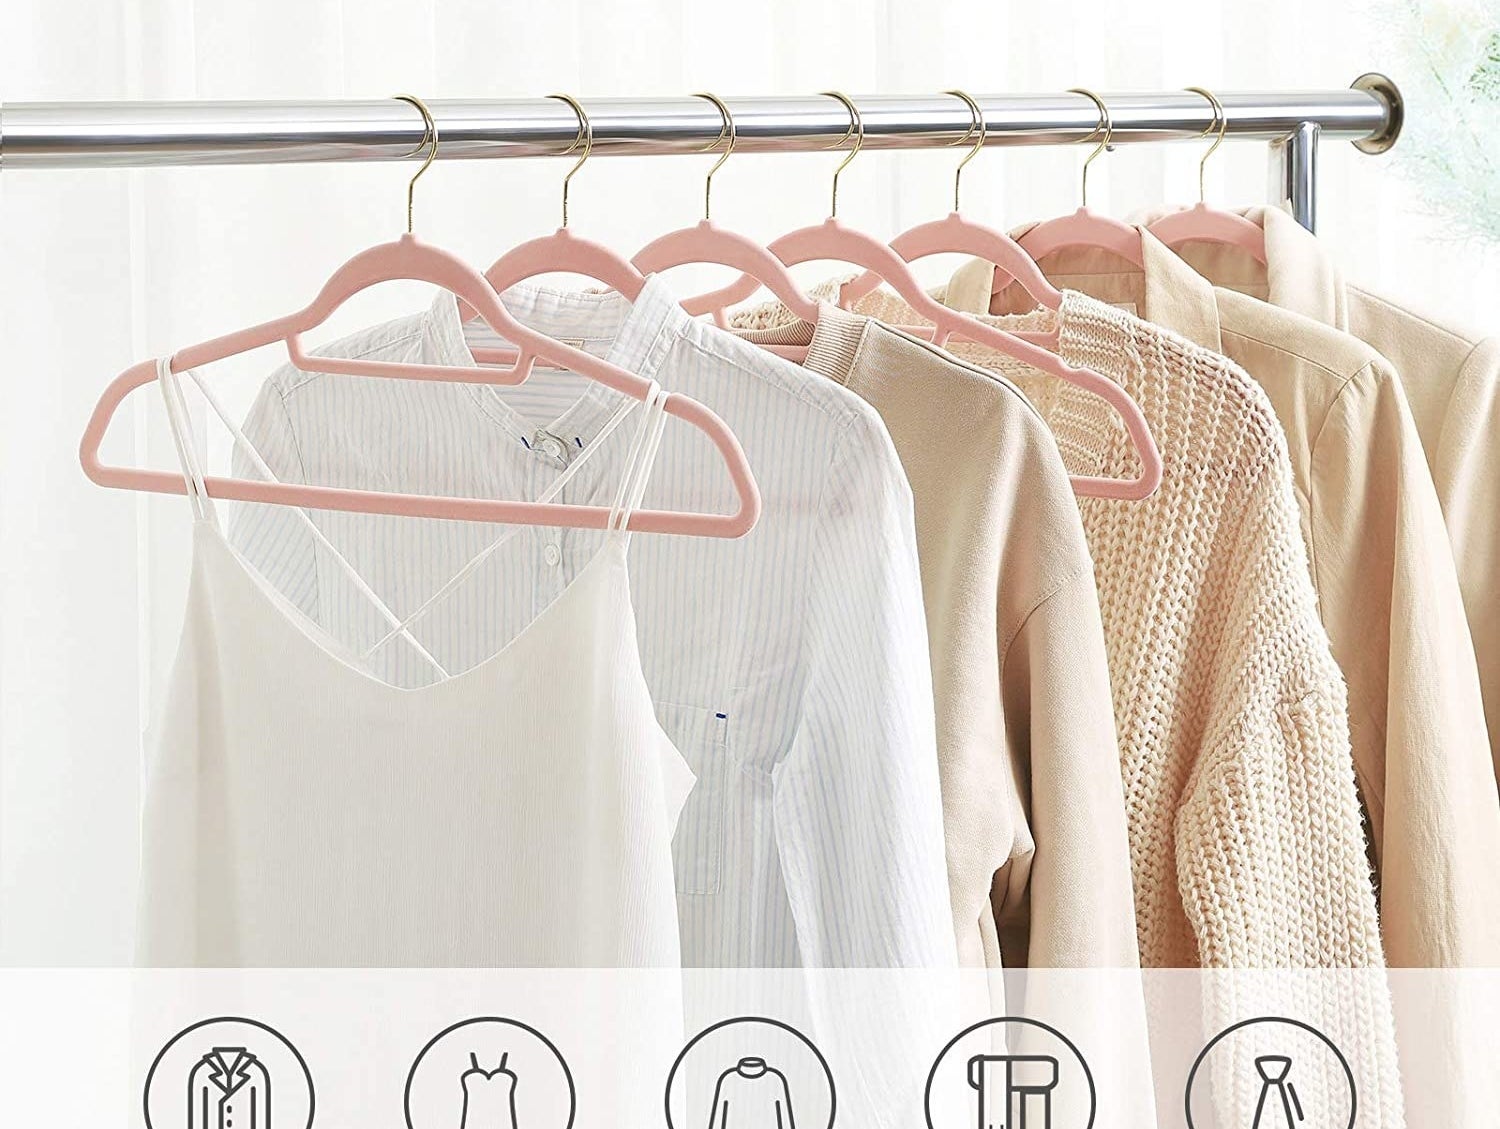 clothes on the hangers